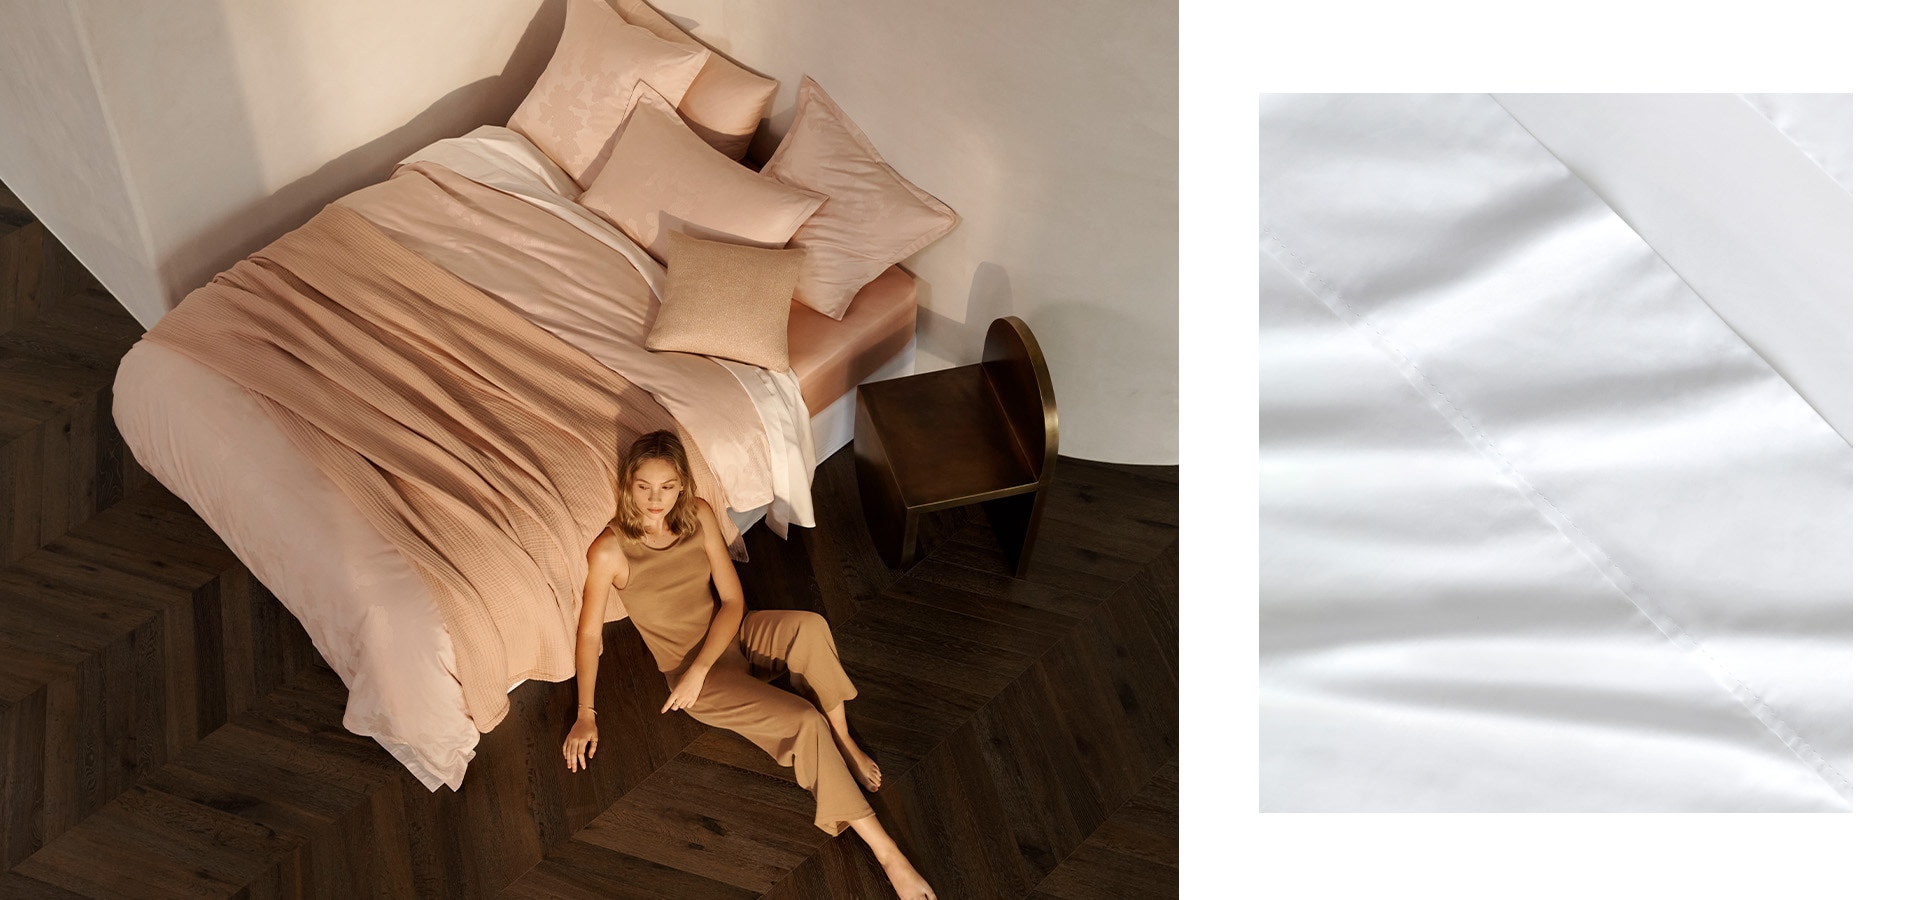 split image. left side, white model with blonde hair sits on wooden floor, back leaning against a pink bed layered with blanket and pillows. right side, a close up of a white cotton sateen sheet.